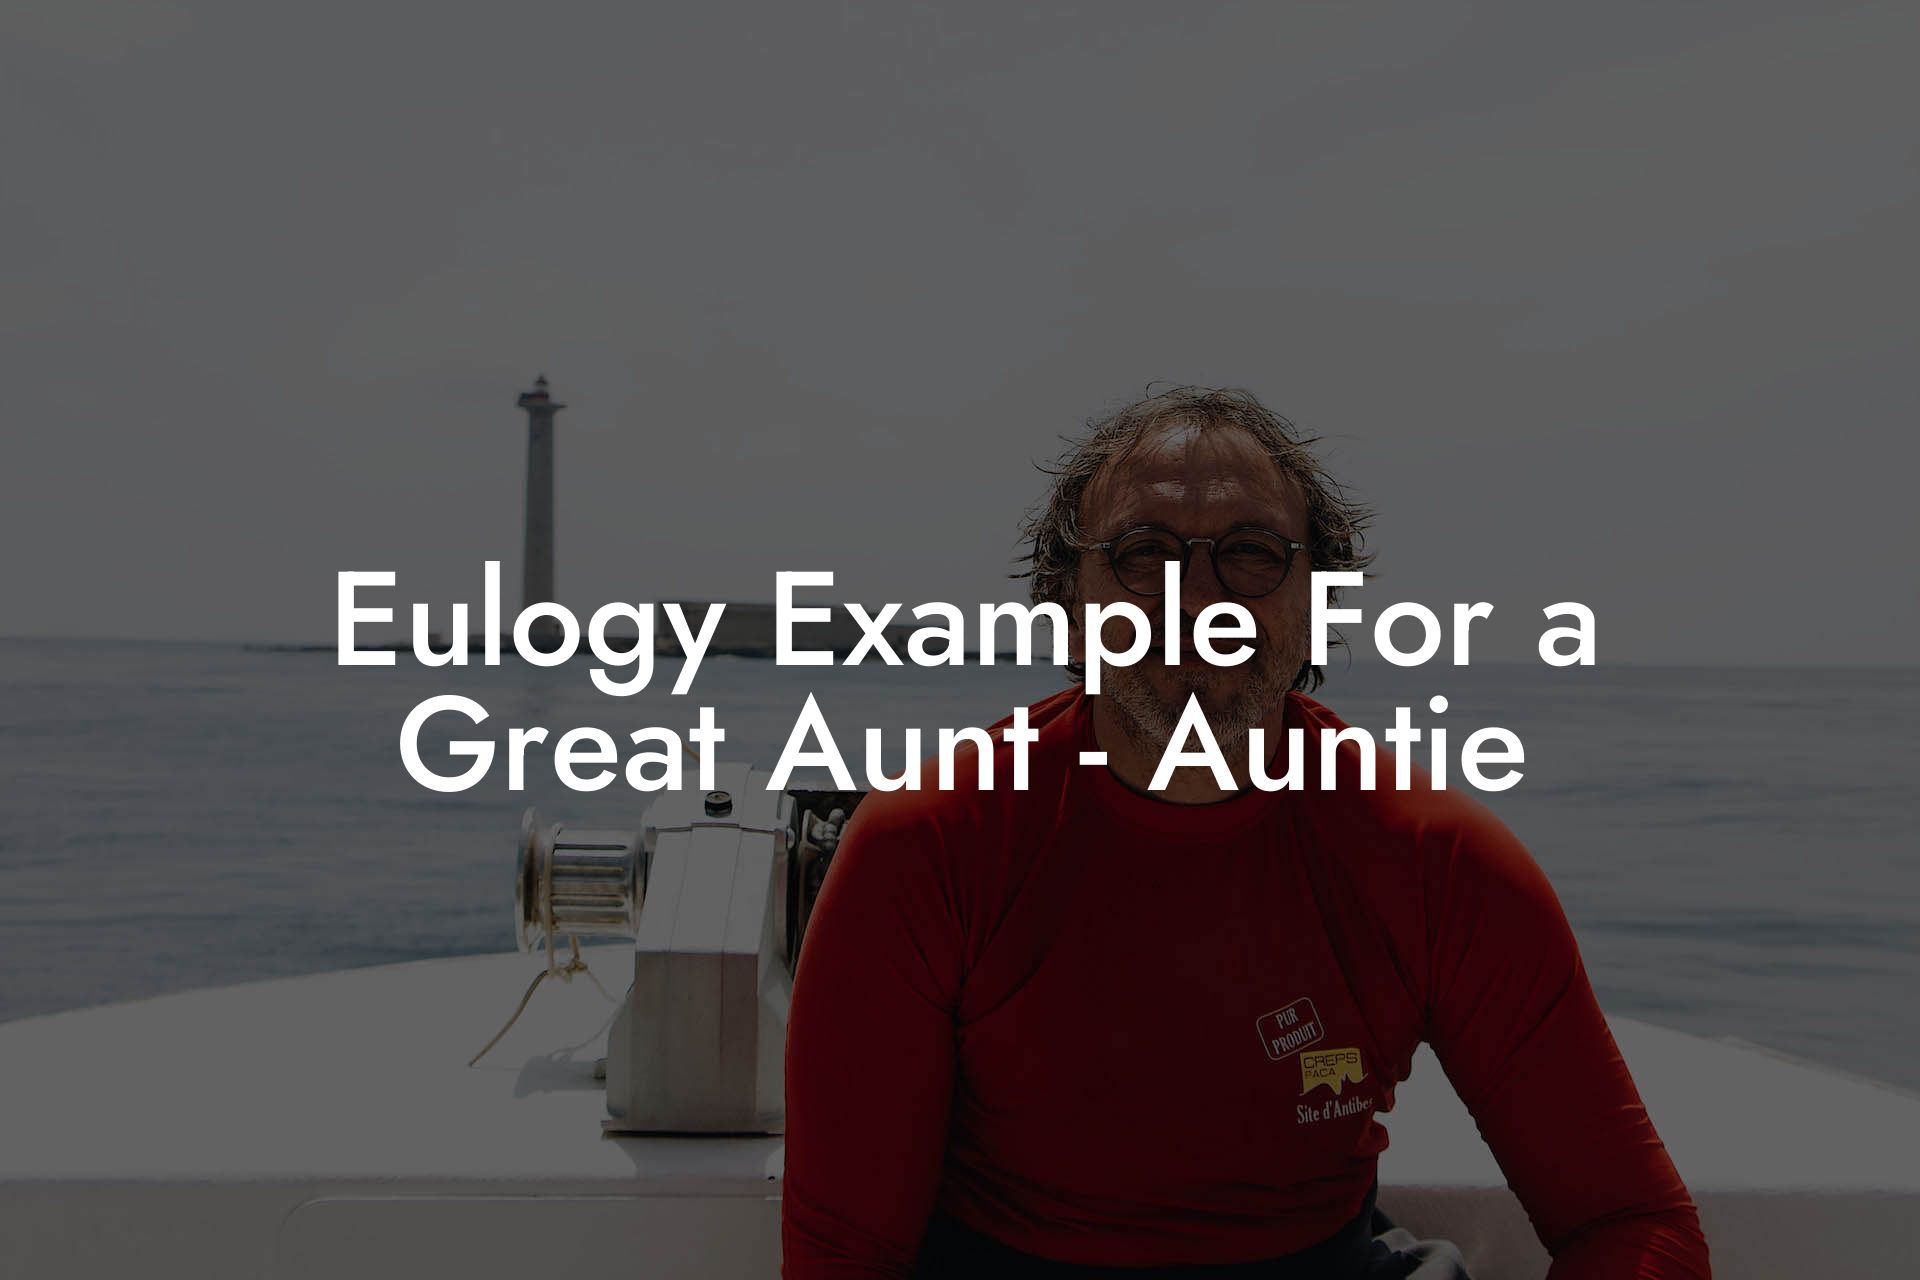 Eulogy Example For a Great Aunt - Auntie